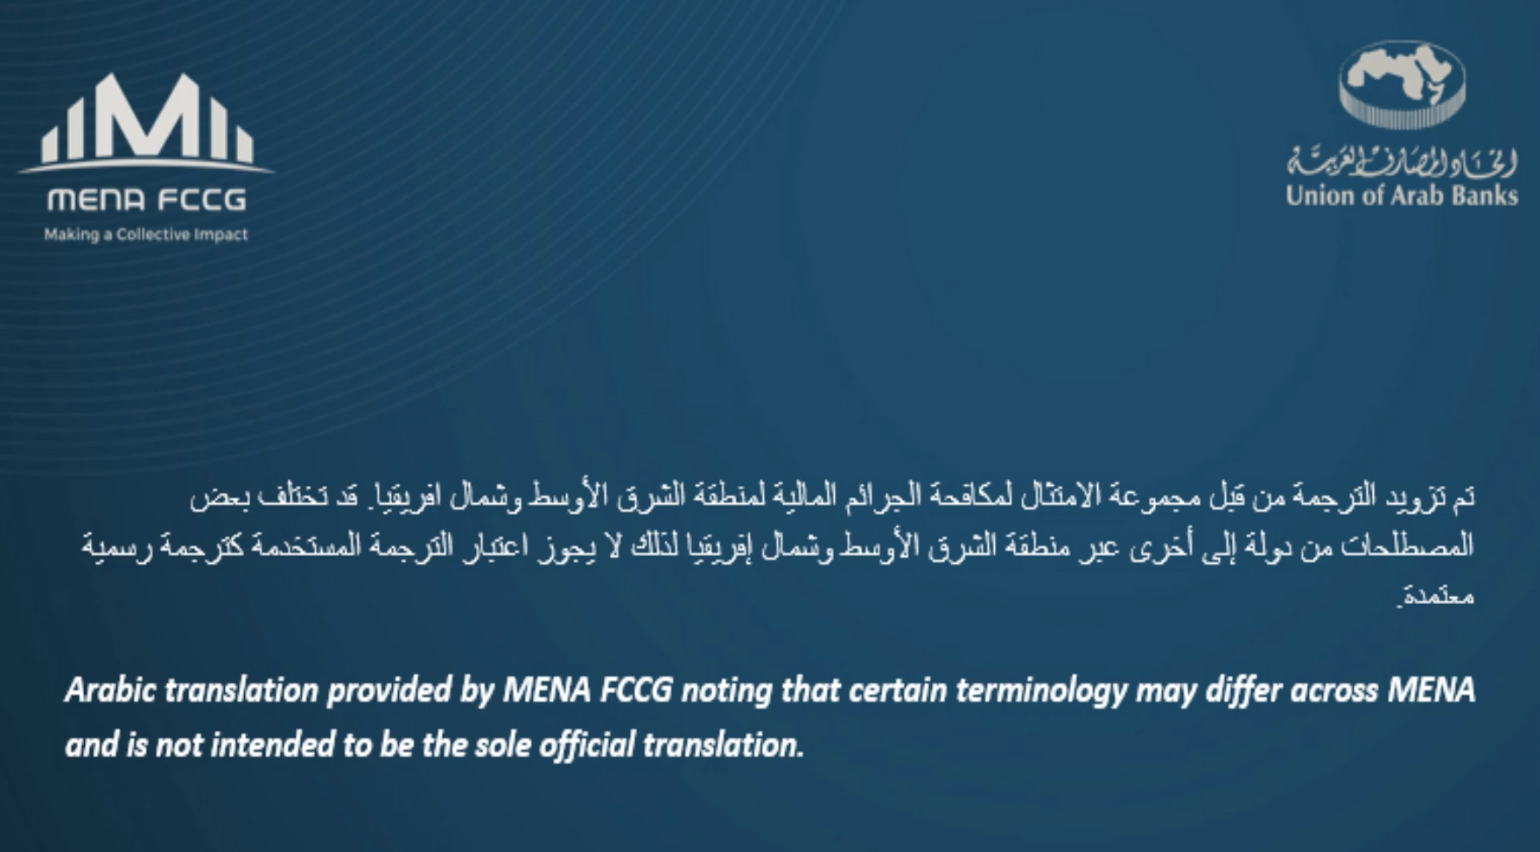 http://mena-fccg.magpiex.co.uk/wp-content/uploads/2020/09/9-Payment-Transparency.png